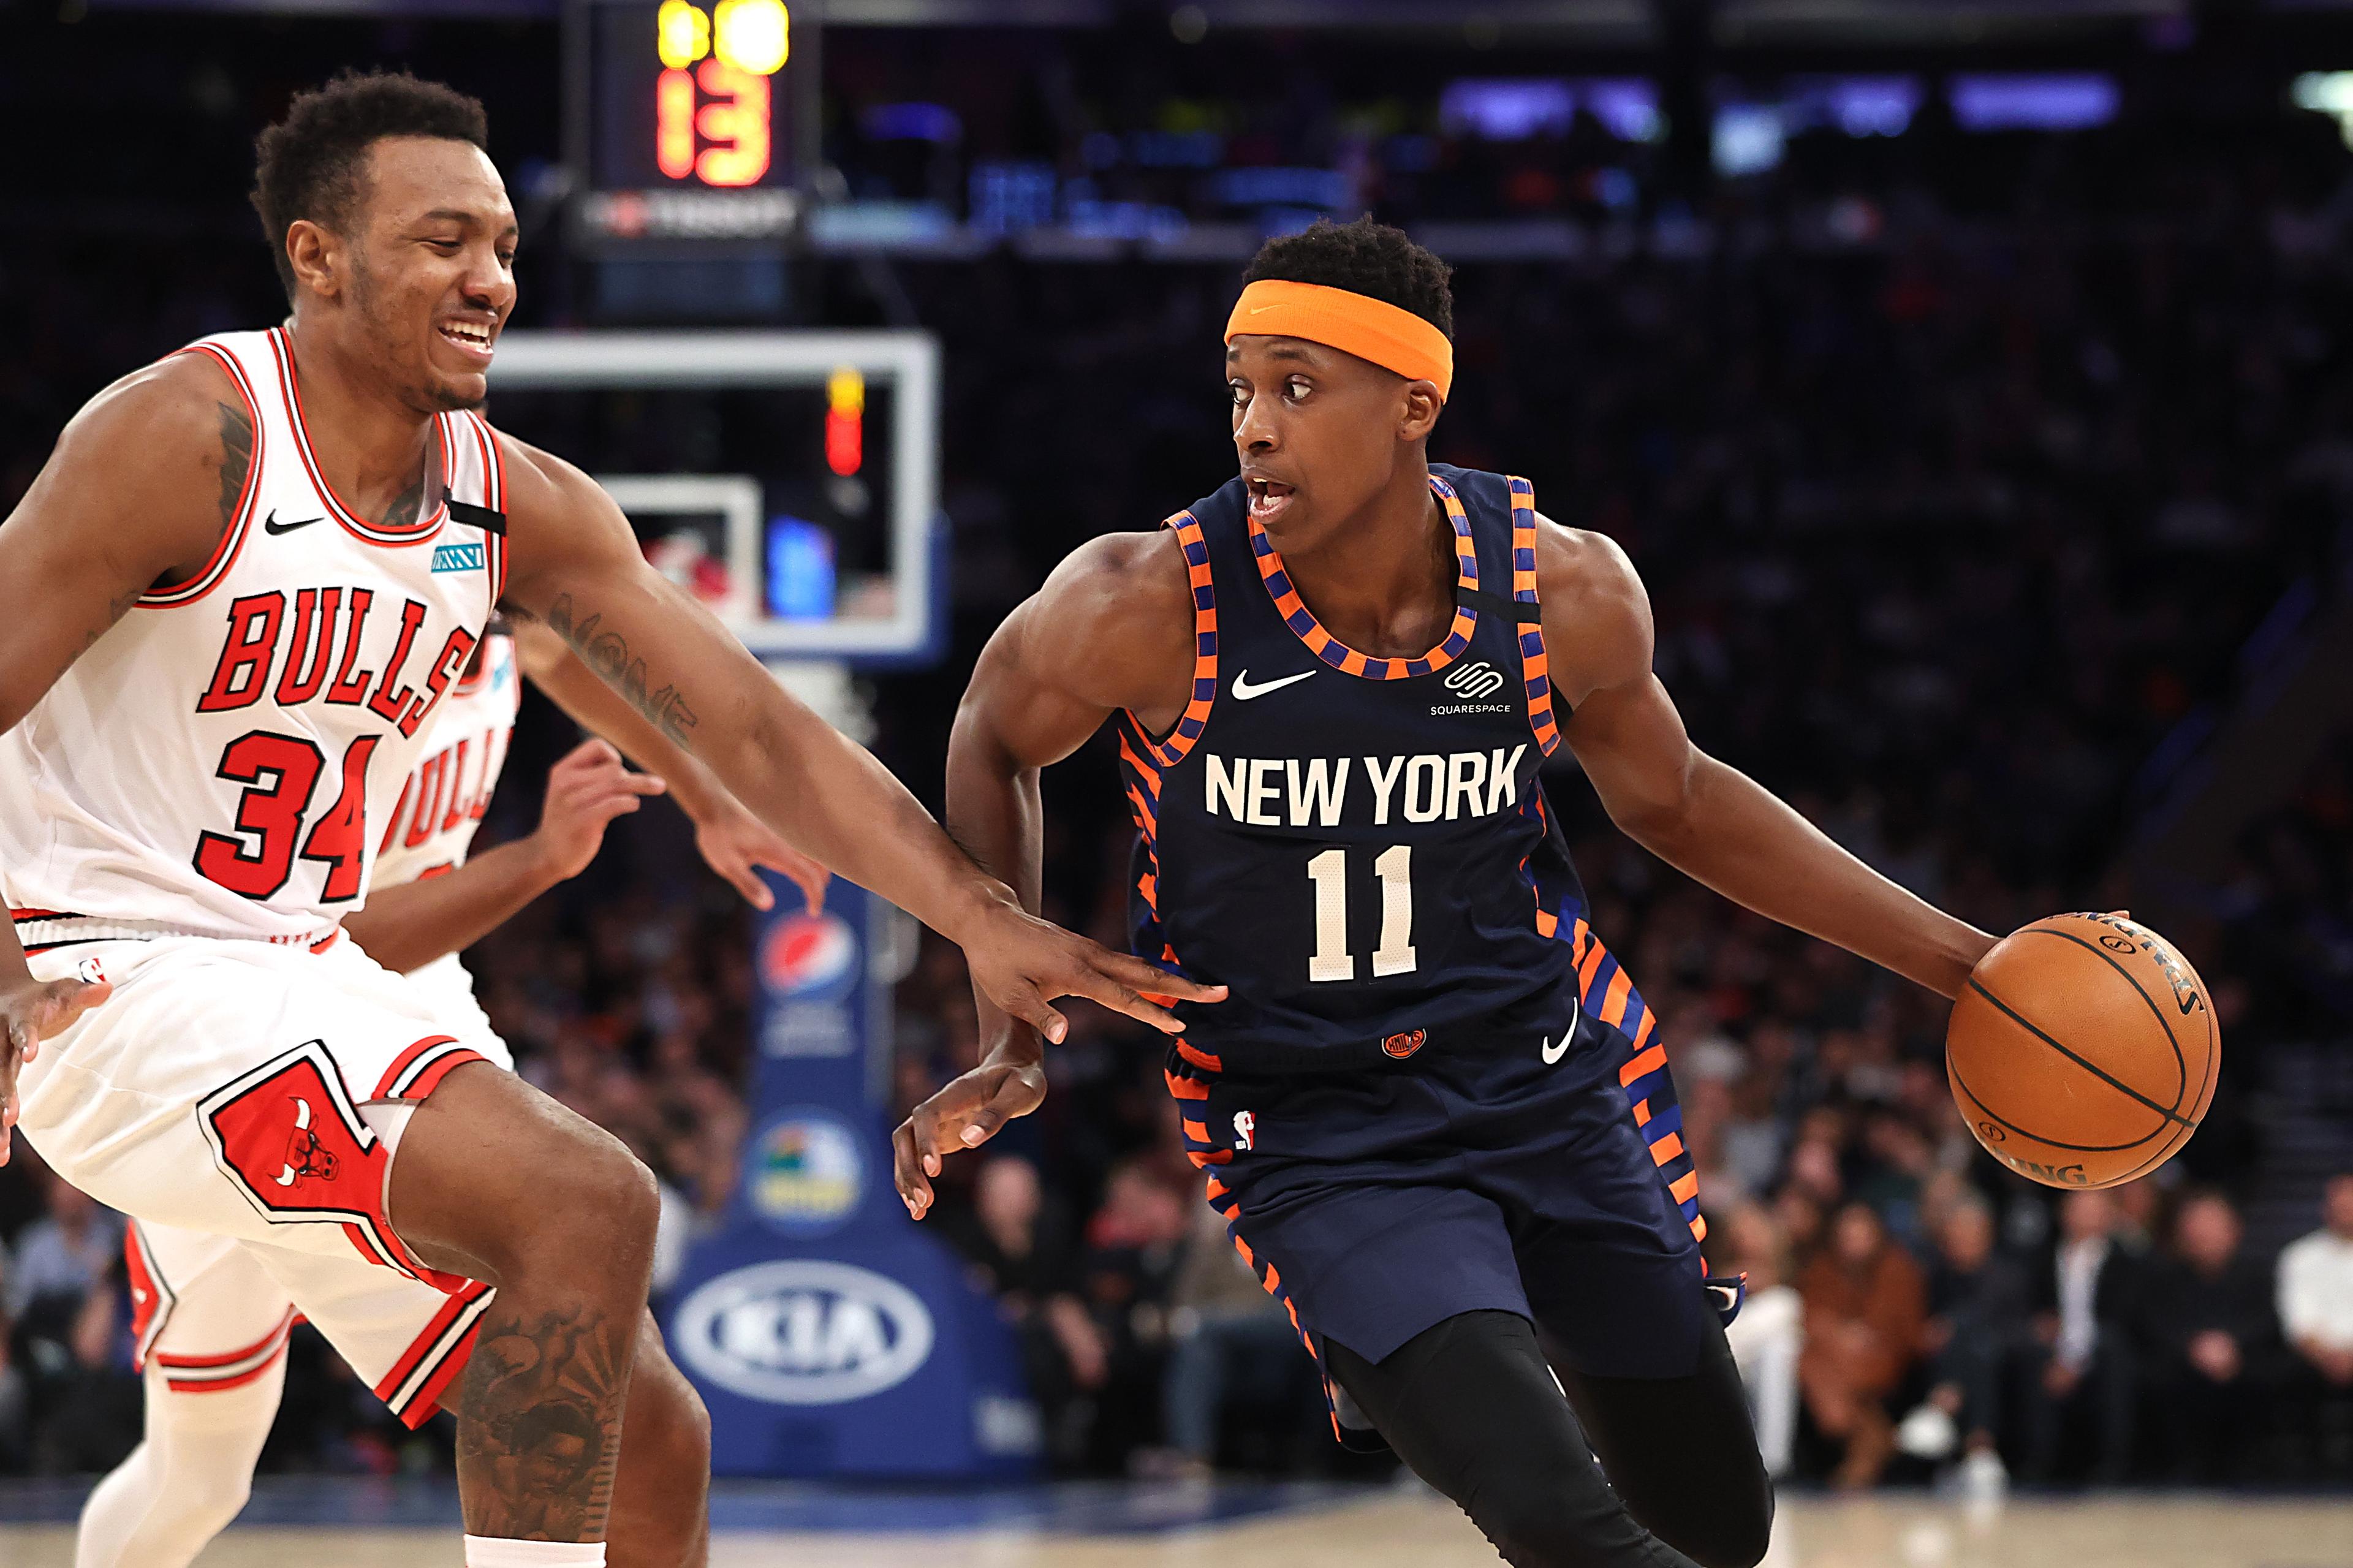 Feb 29, 2020; New York, New York, USA; New York Knicks guard Frank Ntilikina (11) dribbles as Chicago Bulls center Wendell Carter Jr. (34) defends during the second half at Madison Square Garden. / Vincent Carchietta-USA TODAY Sports